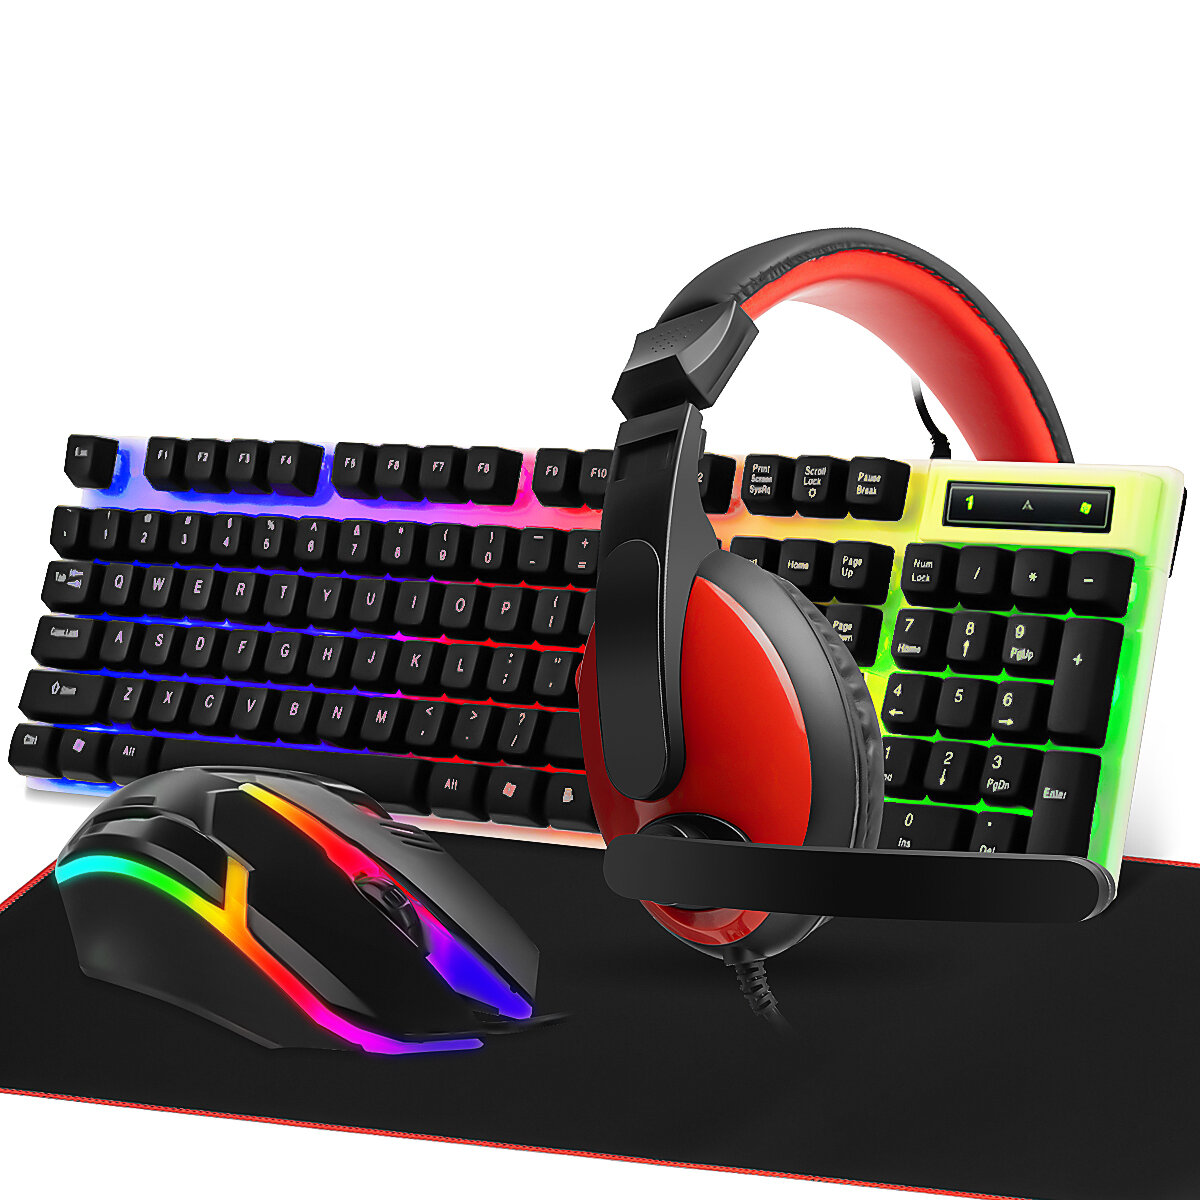 SHPADOO 4 in 1 Keyboard Mouse Headset Mousepad Combo 104-Keys Suspended Translucent Keycaps Colorful